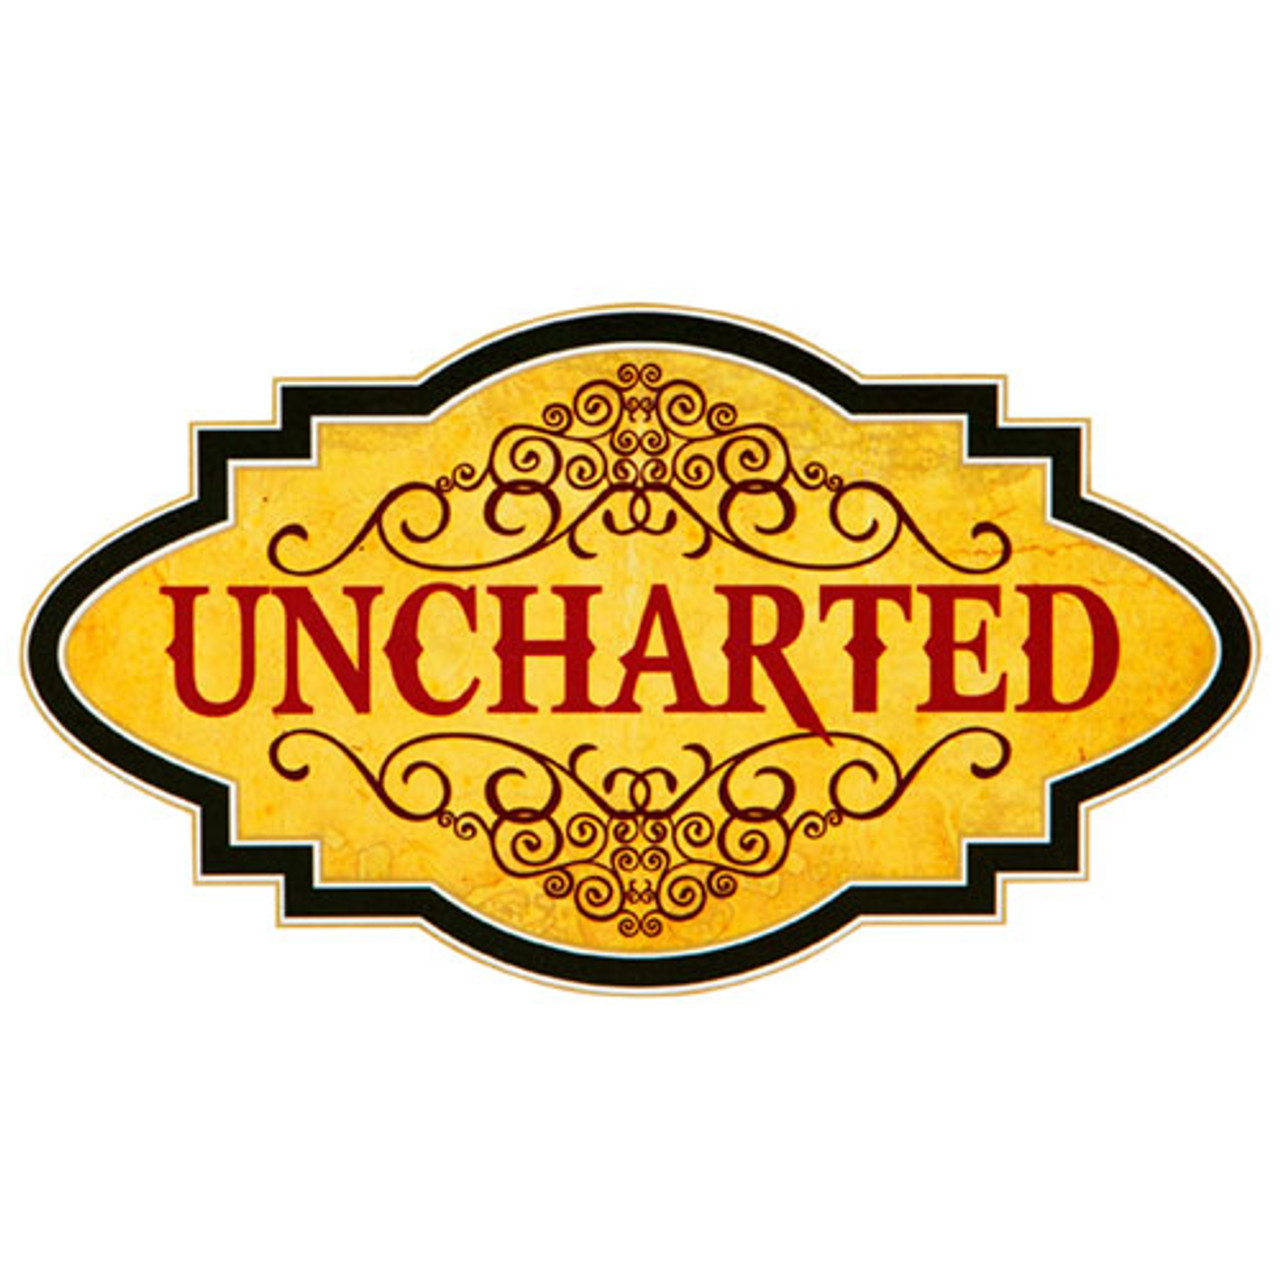 Uncharted Gordo Cigars - 6 x 60 (Box of 20)